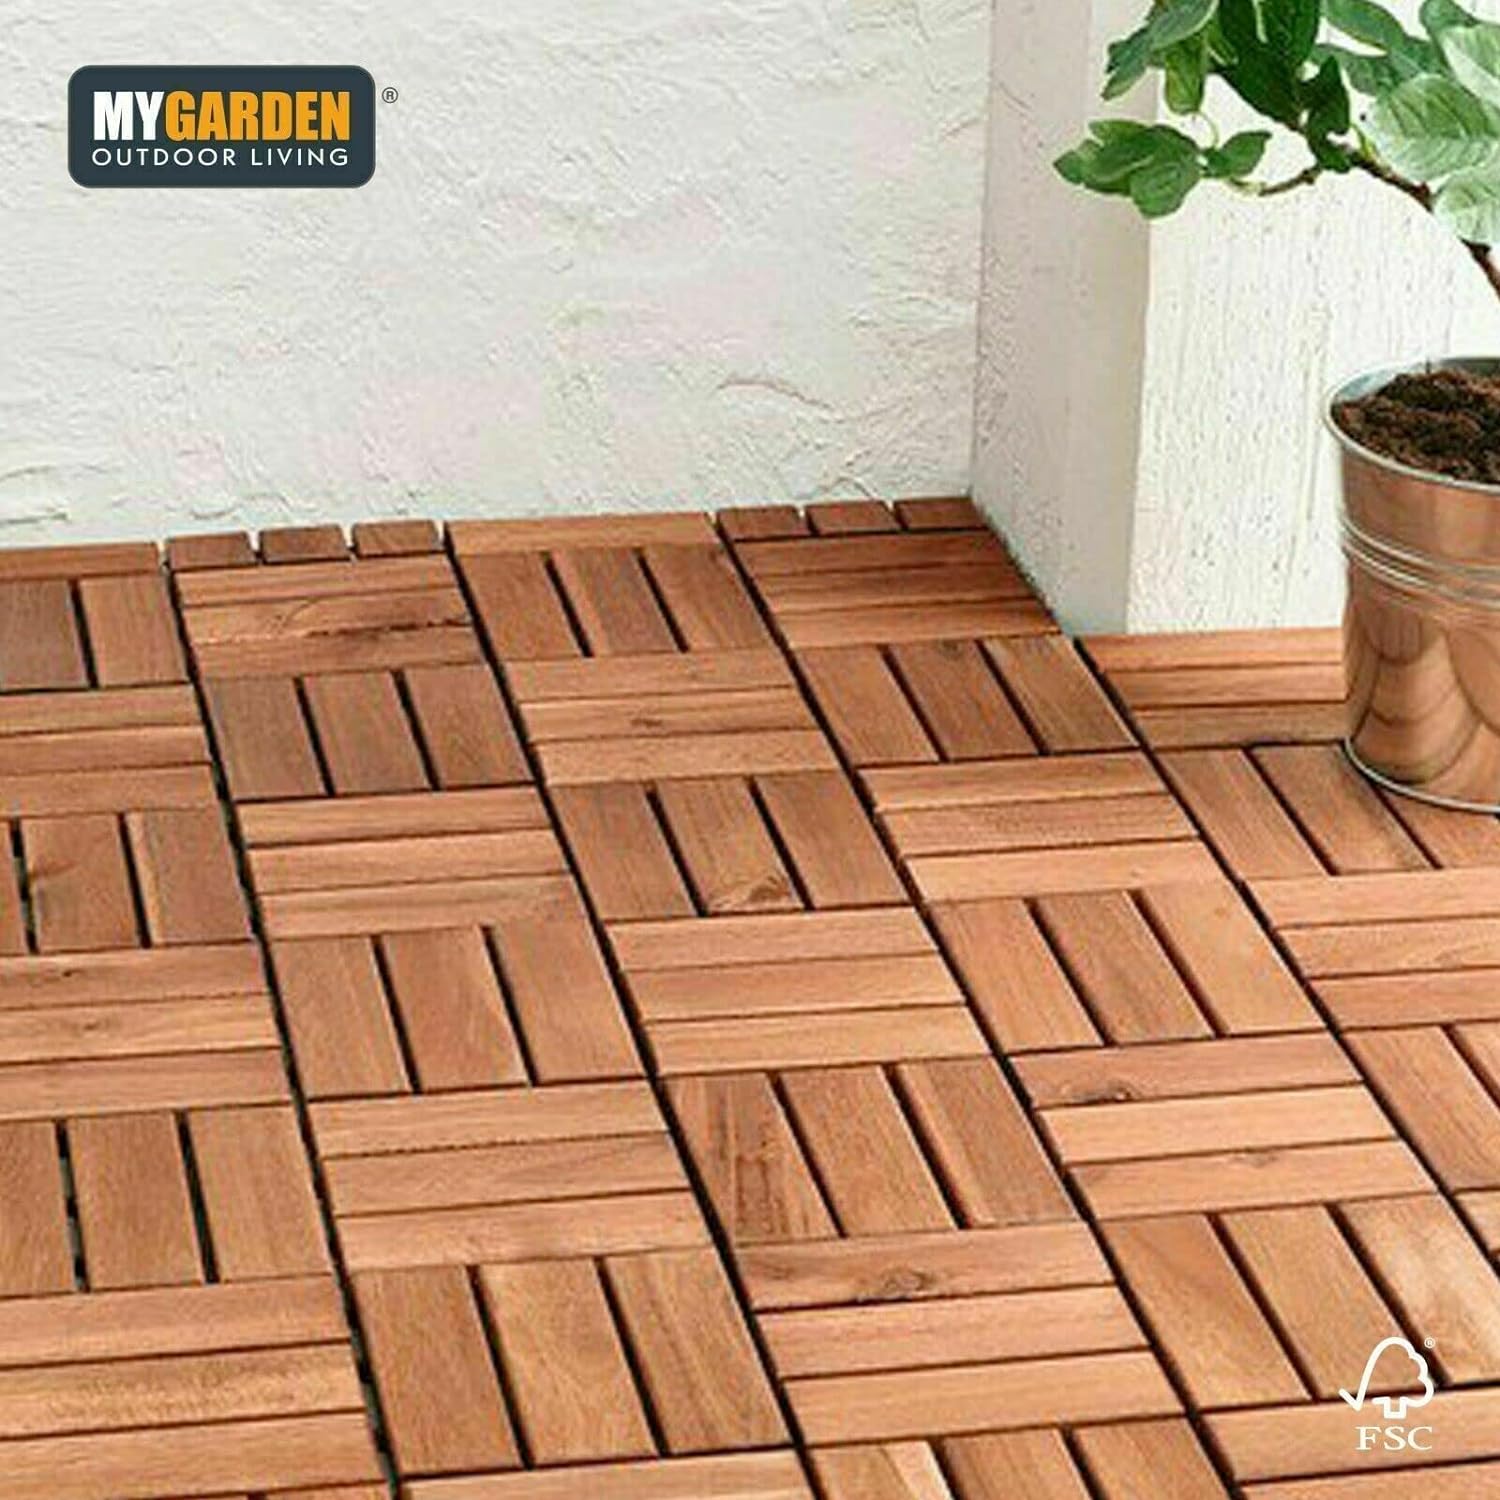 ADEPTNA Pack of 18 Durable Wooden Decking Tiles - Wooden Tiles for Garden Patio and Outdoor Deck Areas – Easy to Install Interlocking Click System (18)